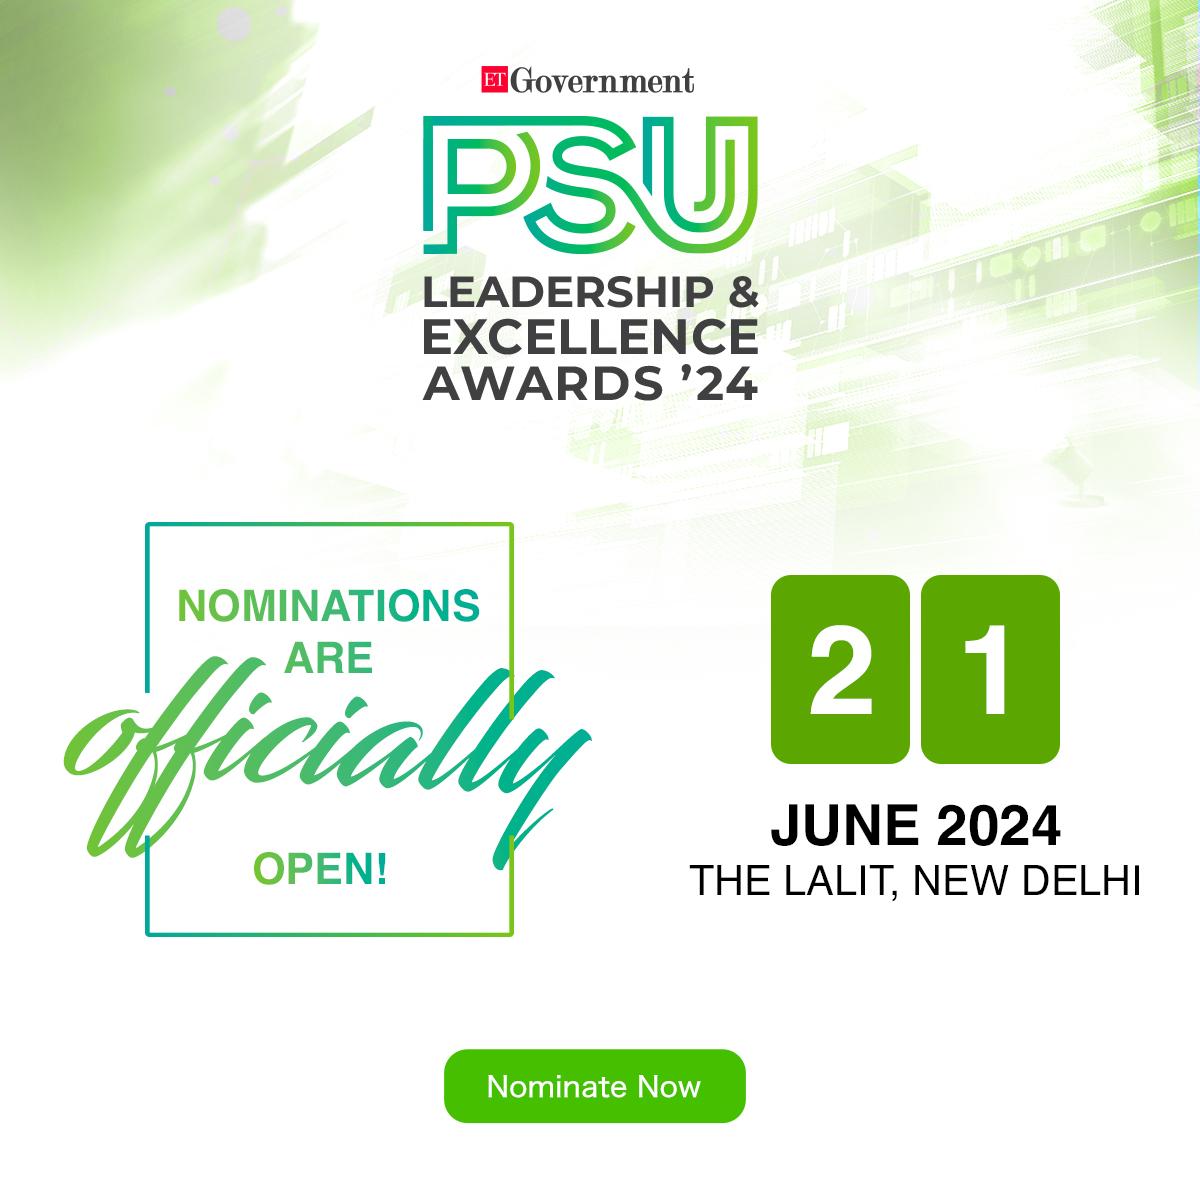 🌟 Shine a light on excellence! Nominations for the ET Government PSU Awards are OPEN to all. 🏆 Nominate now and honor those driving innovation and impact in the public sector! Nominate Here: bit.ly/3WquT4p #ETGovernment #ETPSU #DigitalTransformation